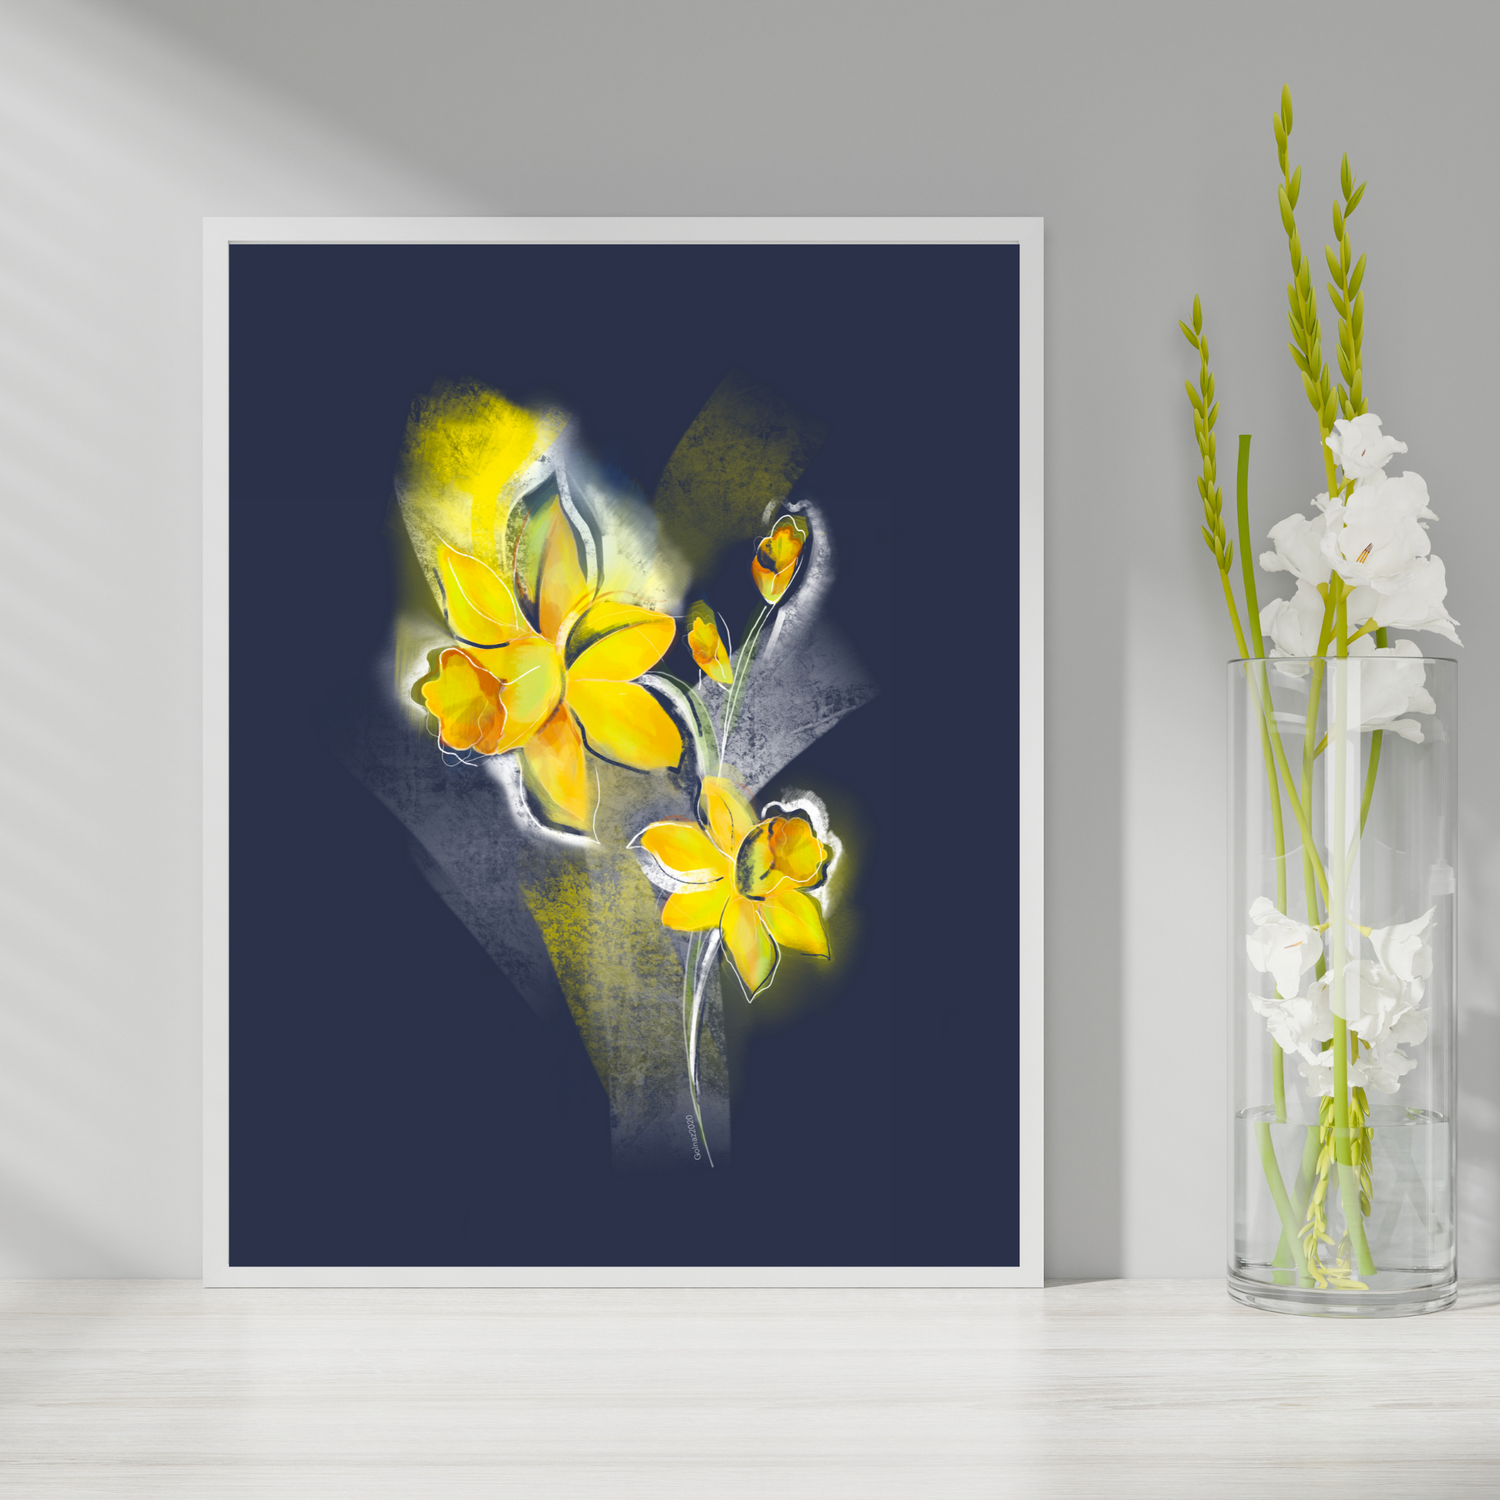 An example of the Daffodil painting by ArisaTeam near a vase of flowers